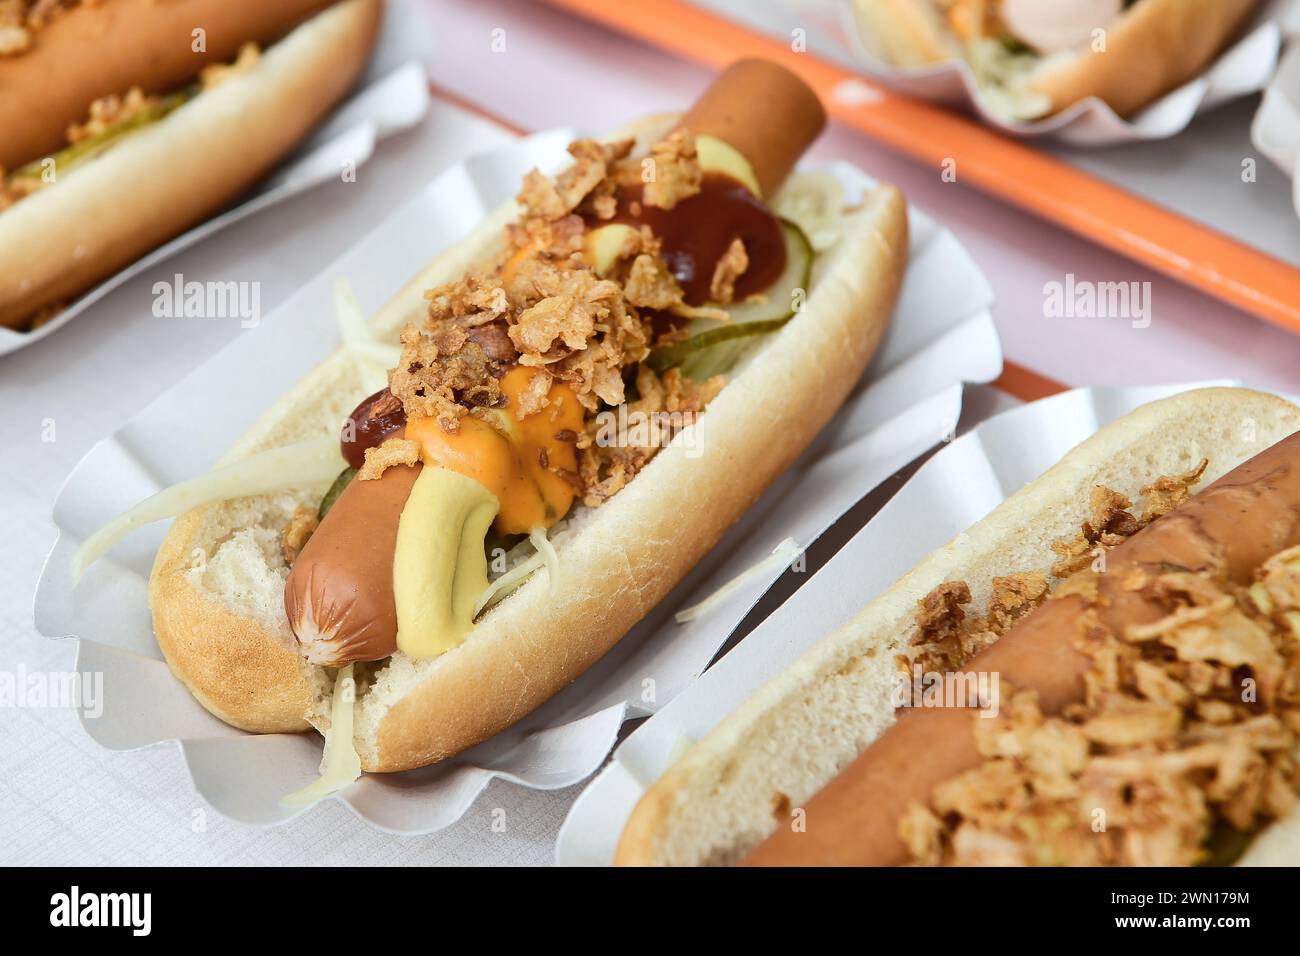 Frankfurter sausage hot dogs served with crispy onion bits and relish, on paper plates Stock Photo